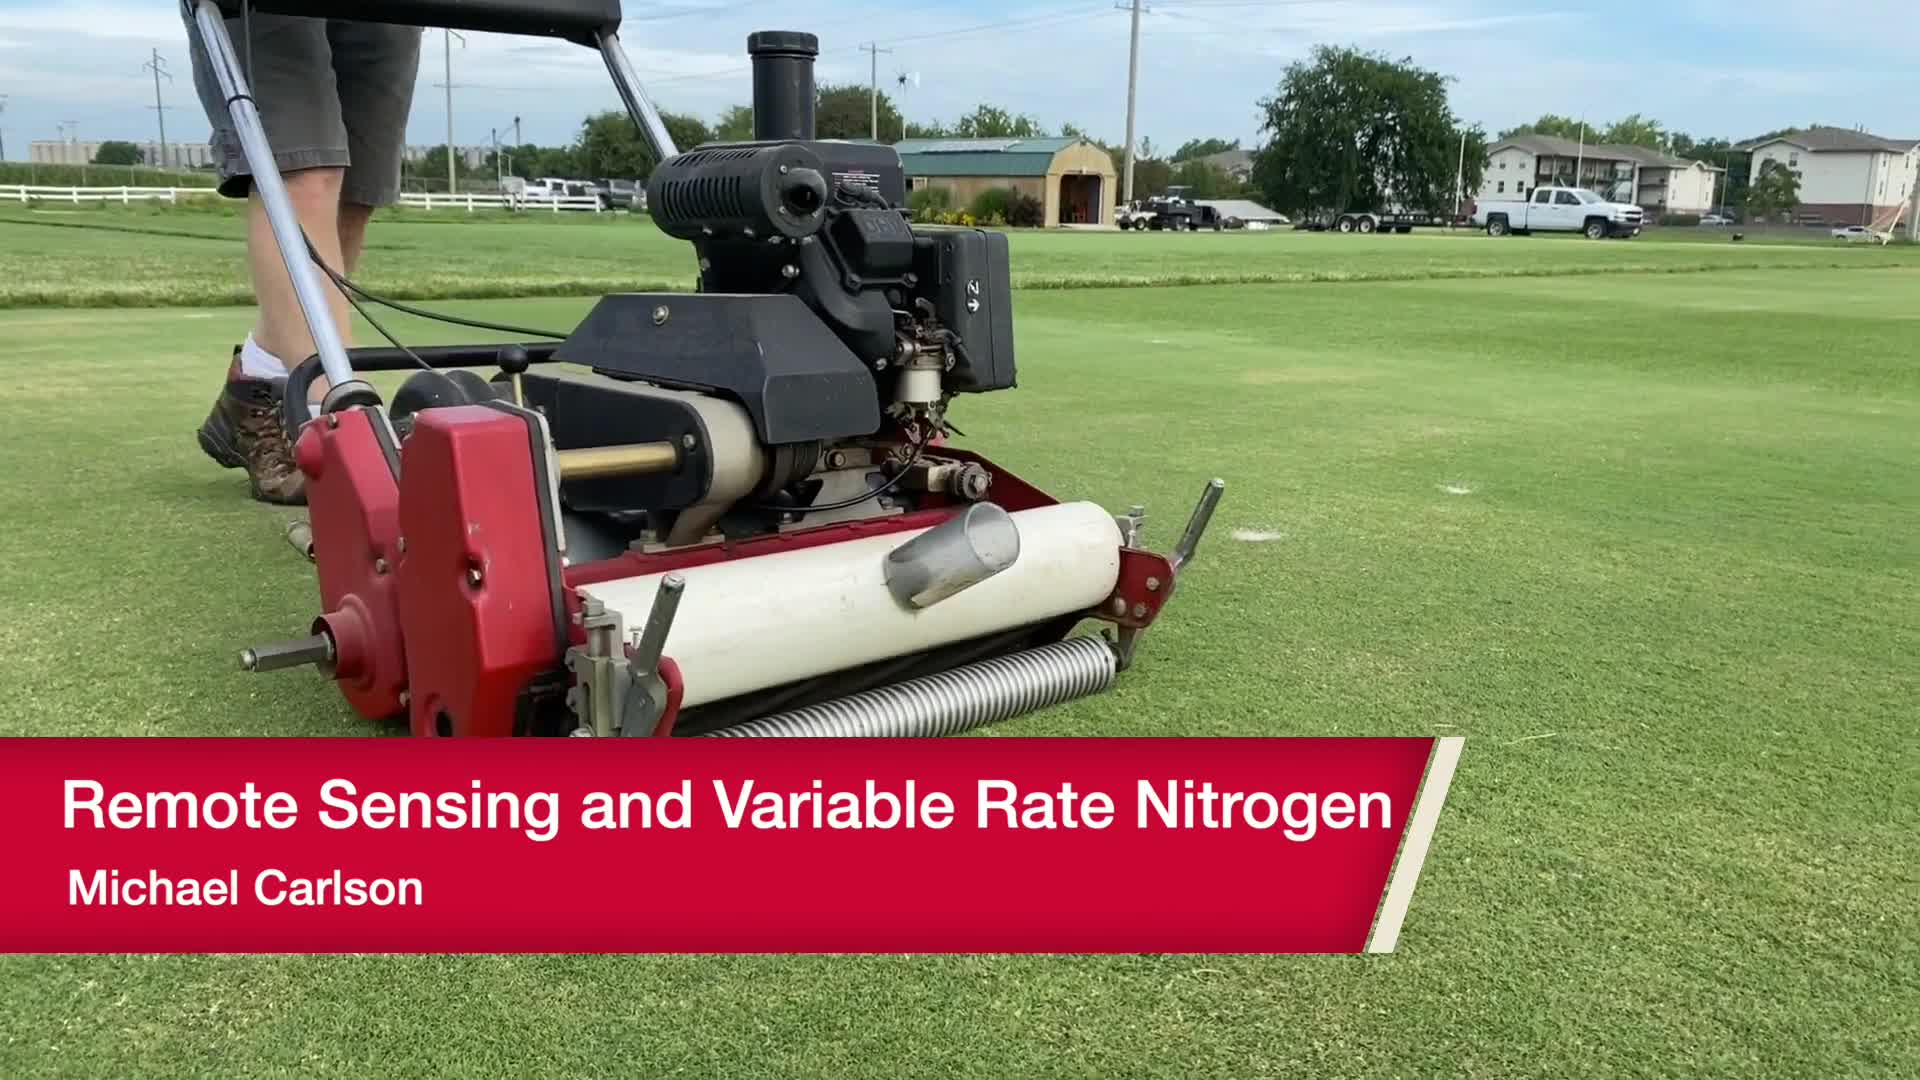 Remote Sensing and Variable Rate Nitrogen